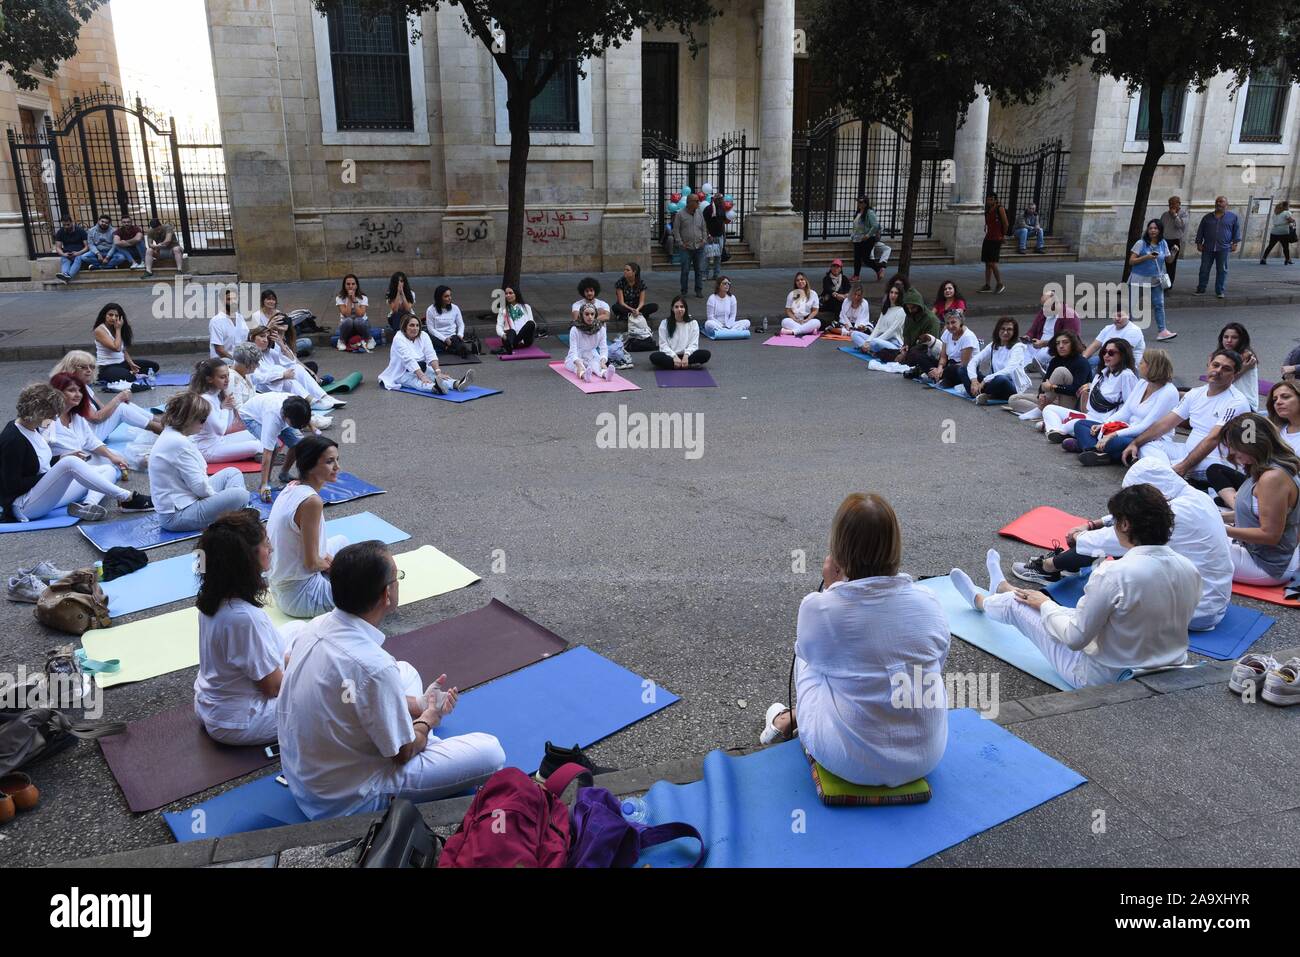 *** STRICTLY NO SALES TO FRENCH MEDIA OR PUBLISHERS *** November 17, 2019 - Beirut, Lebanon: A group of Lebanese protesters hold a meditation class in the street near Martyrs' Square, quietly practicing breathing exercices as their leader repeats the mantra 'Love, kindness, peace'. The meditation took place in the morning of a mass rally celebrating the one month-anniversary of the beginning of the Lebanese revolution. Un groupe de manifestants libanais pratiquent la meditation dans la rue pres de la Place des Martyrs, quelques heures avant une grande manifestation pour marquer les 1 mois du s Stock Photo